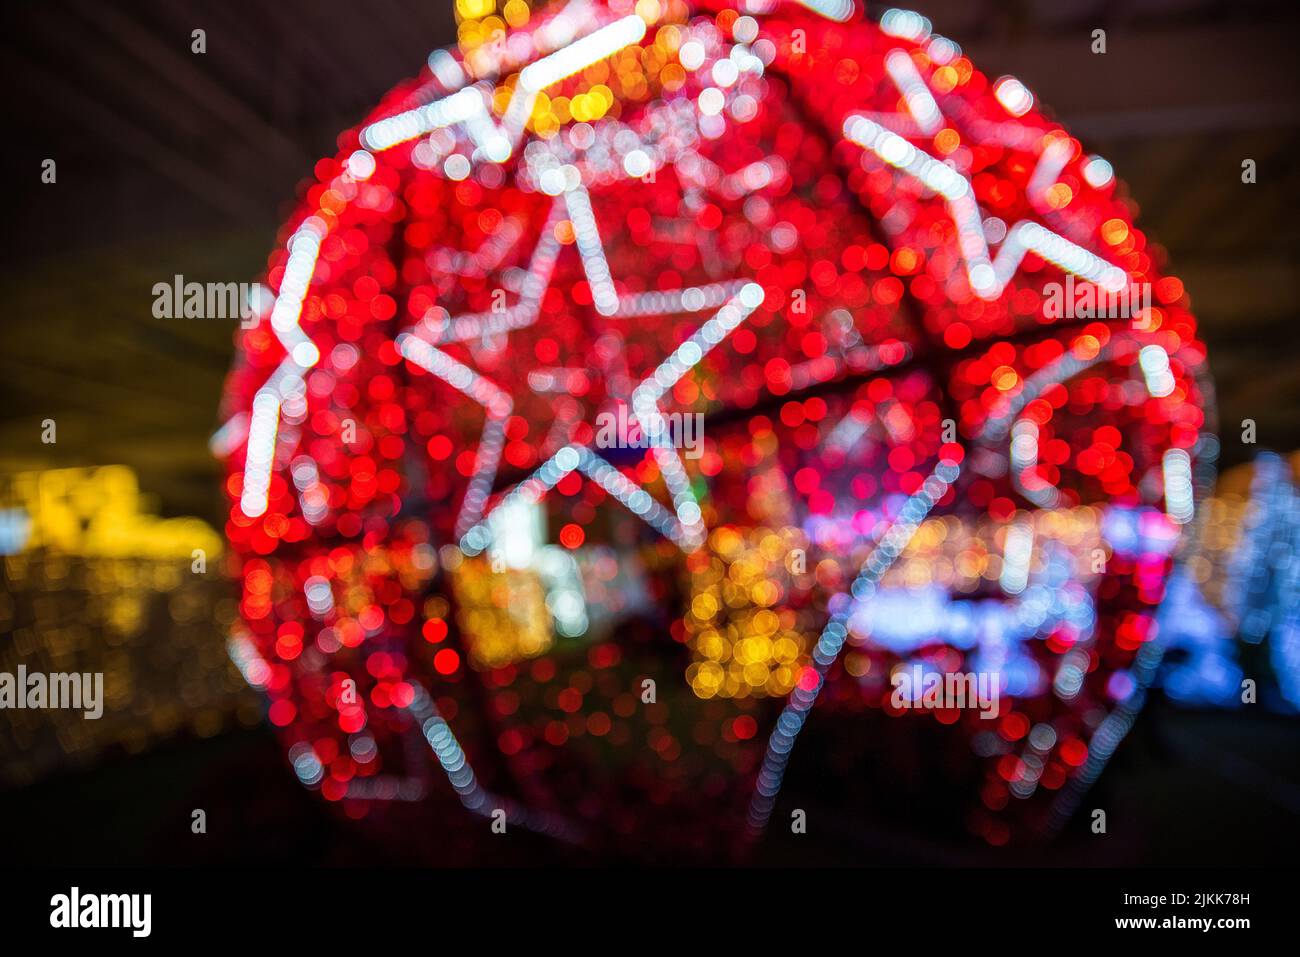 A blurry view of the round red figure with the white stars on it Stock Photo